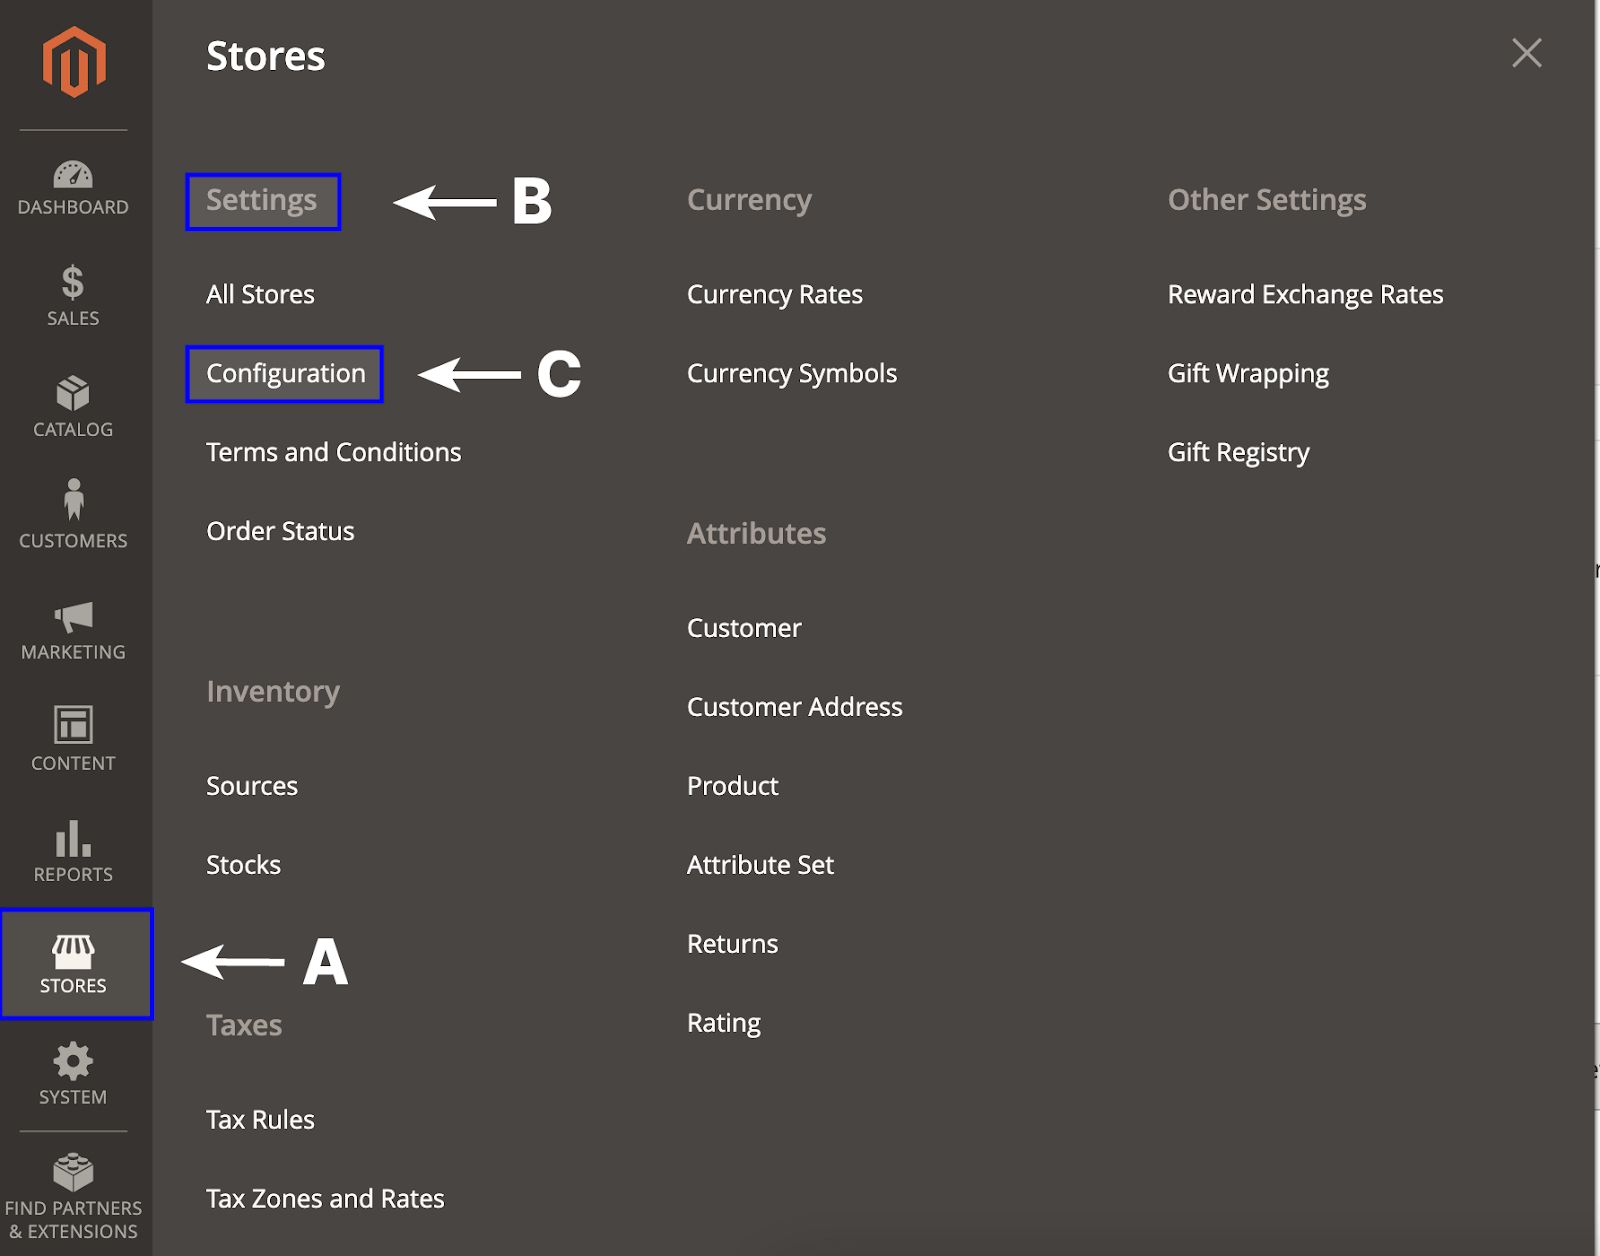 Abed Commerce Store navigation options for Settings, linking to the configuration area